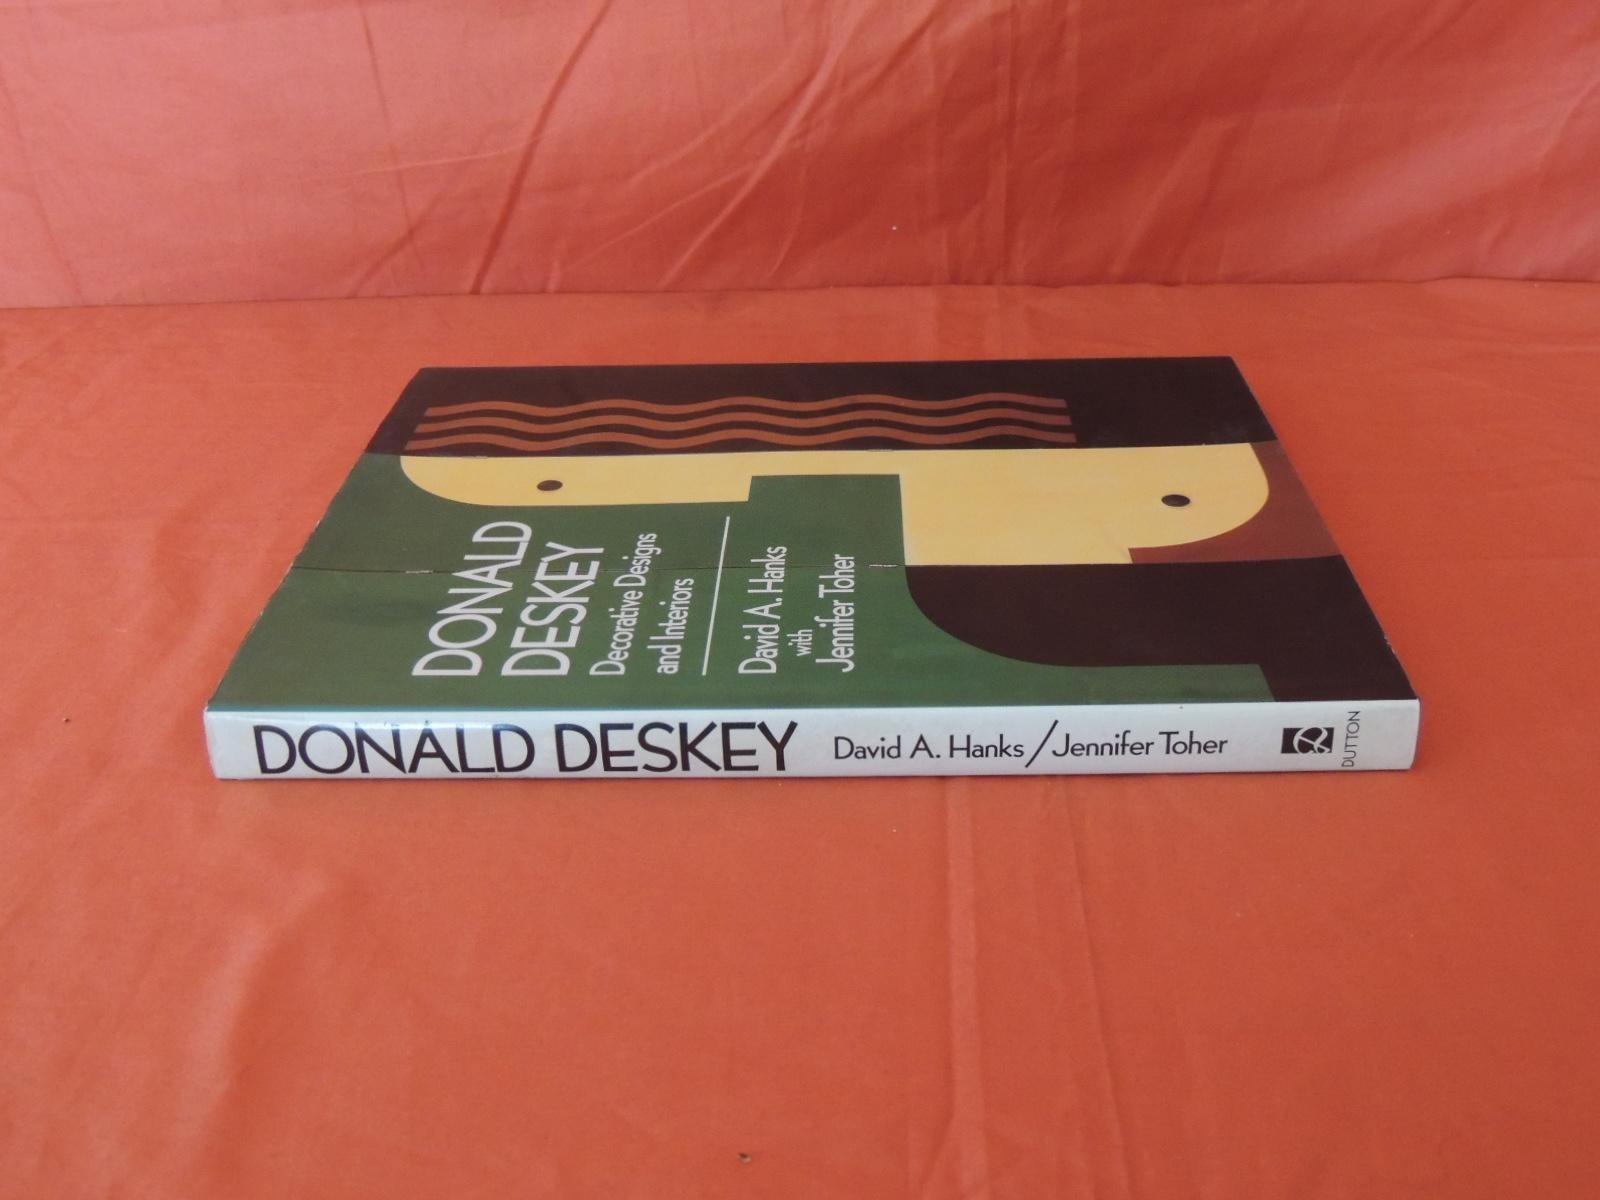 Donald Deskey Decorative Designs and Interiors hard-cover decorative vintage book, David A. Hanks with Jennifer Toher, E. P. Dutton, NY, 1987
Studies the important contributions made to the development of modern American decorative arts and interior